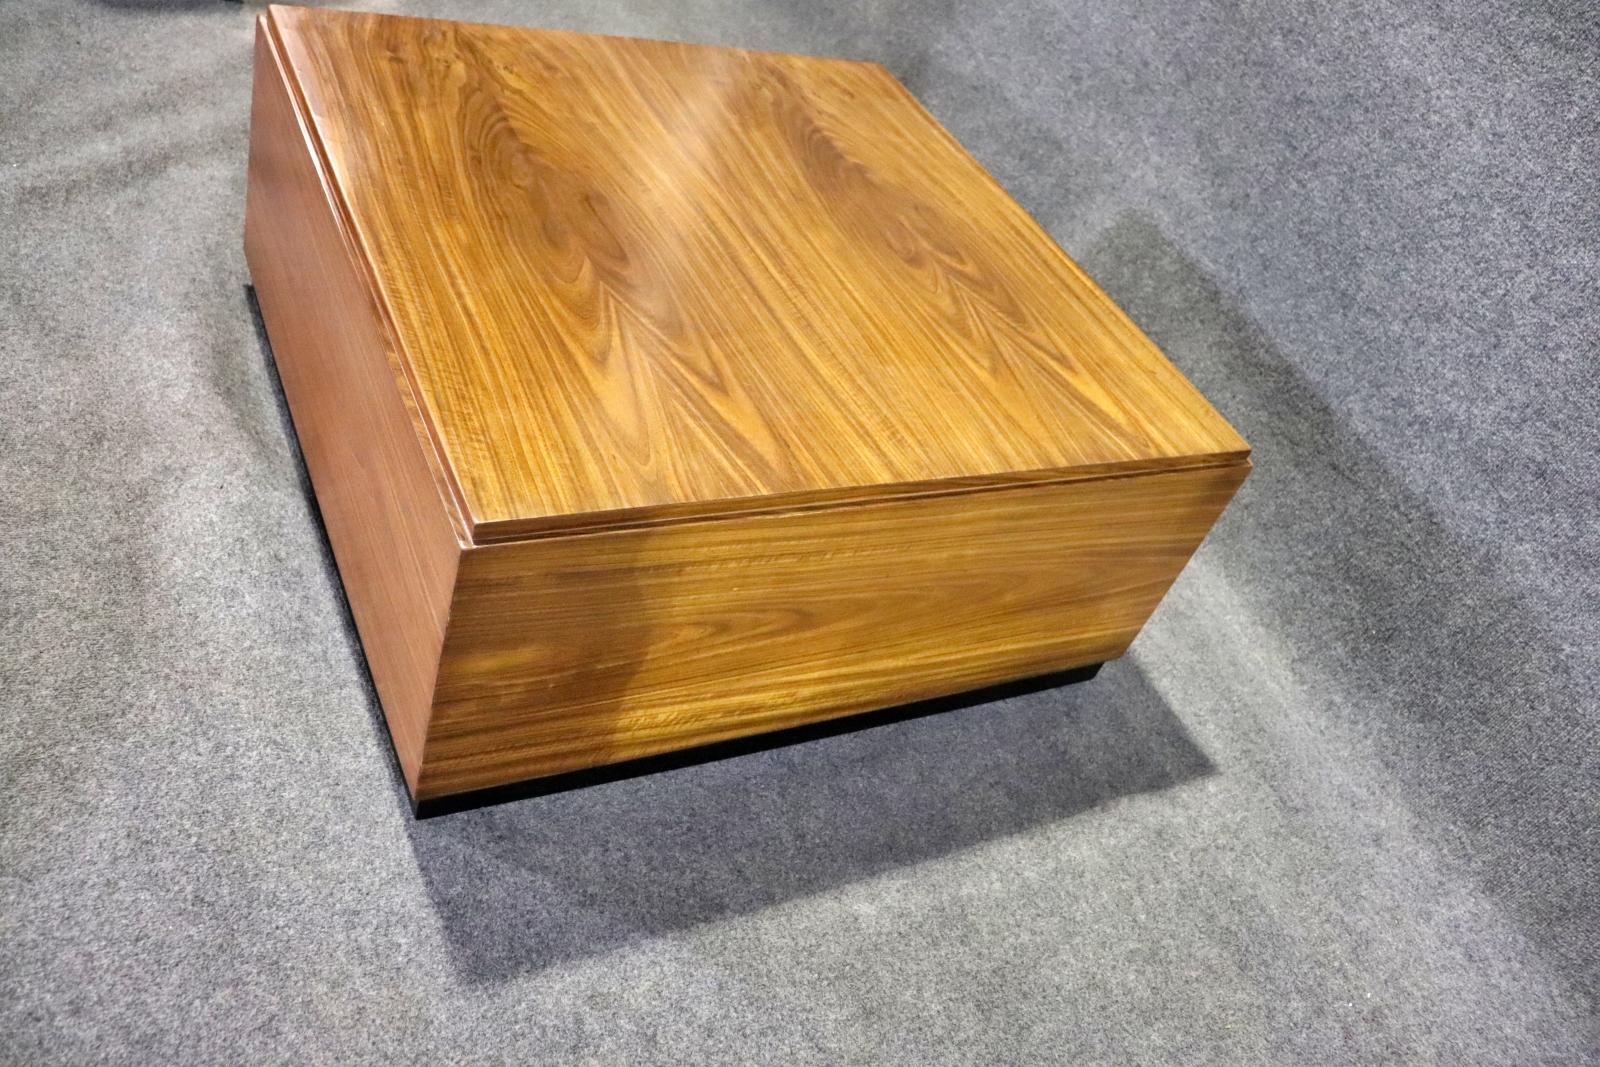 Simple and handsome coffee table with beautiful teak grain. Slight edge around the table.
Please confirm location NY or NJ